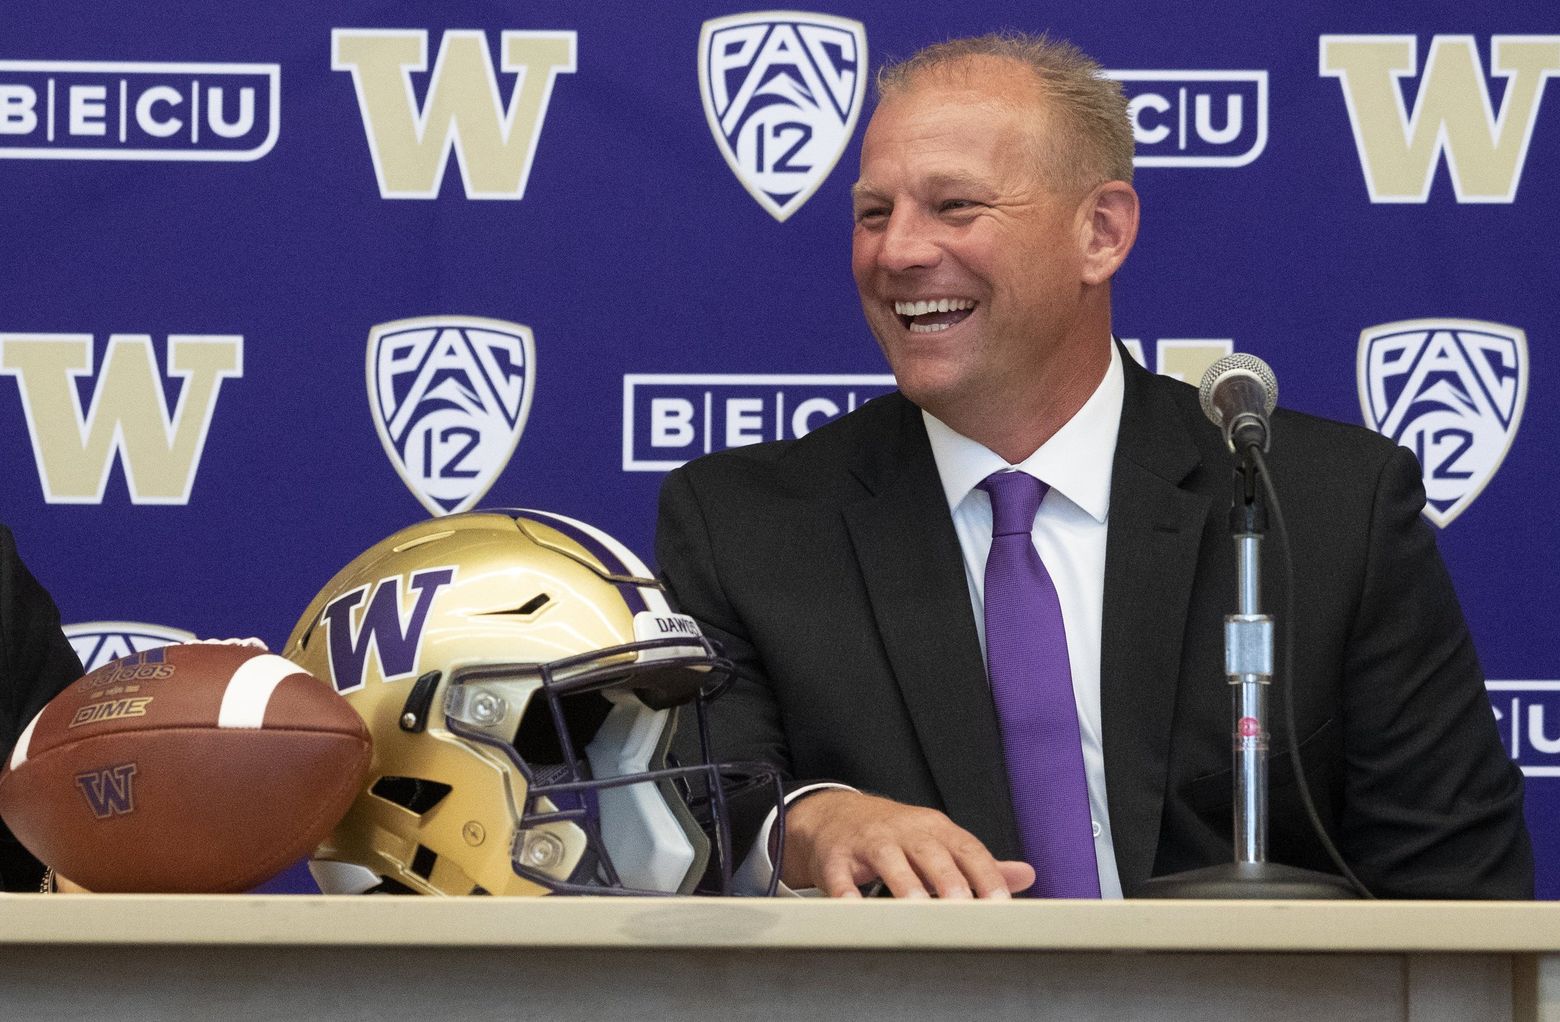 New Huskies head coach Kalen DeBoer accepts challenge to deliver  championships to UW | The Seattle Times